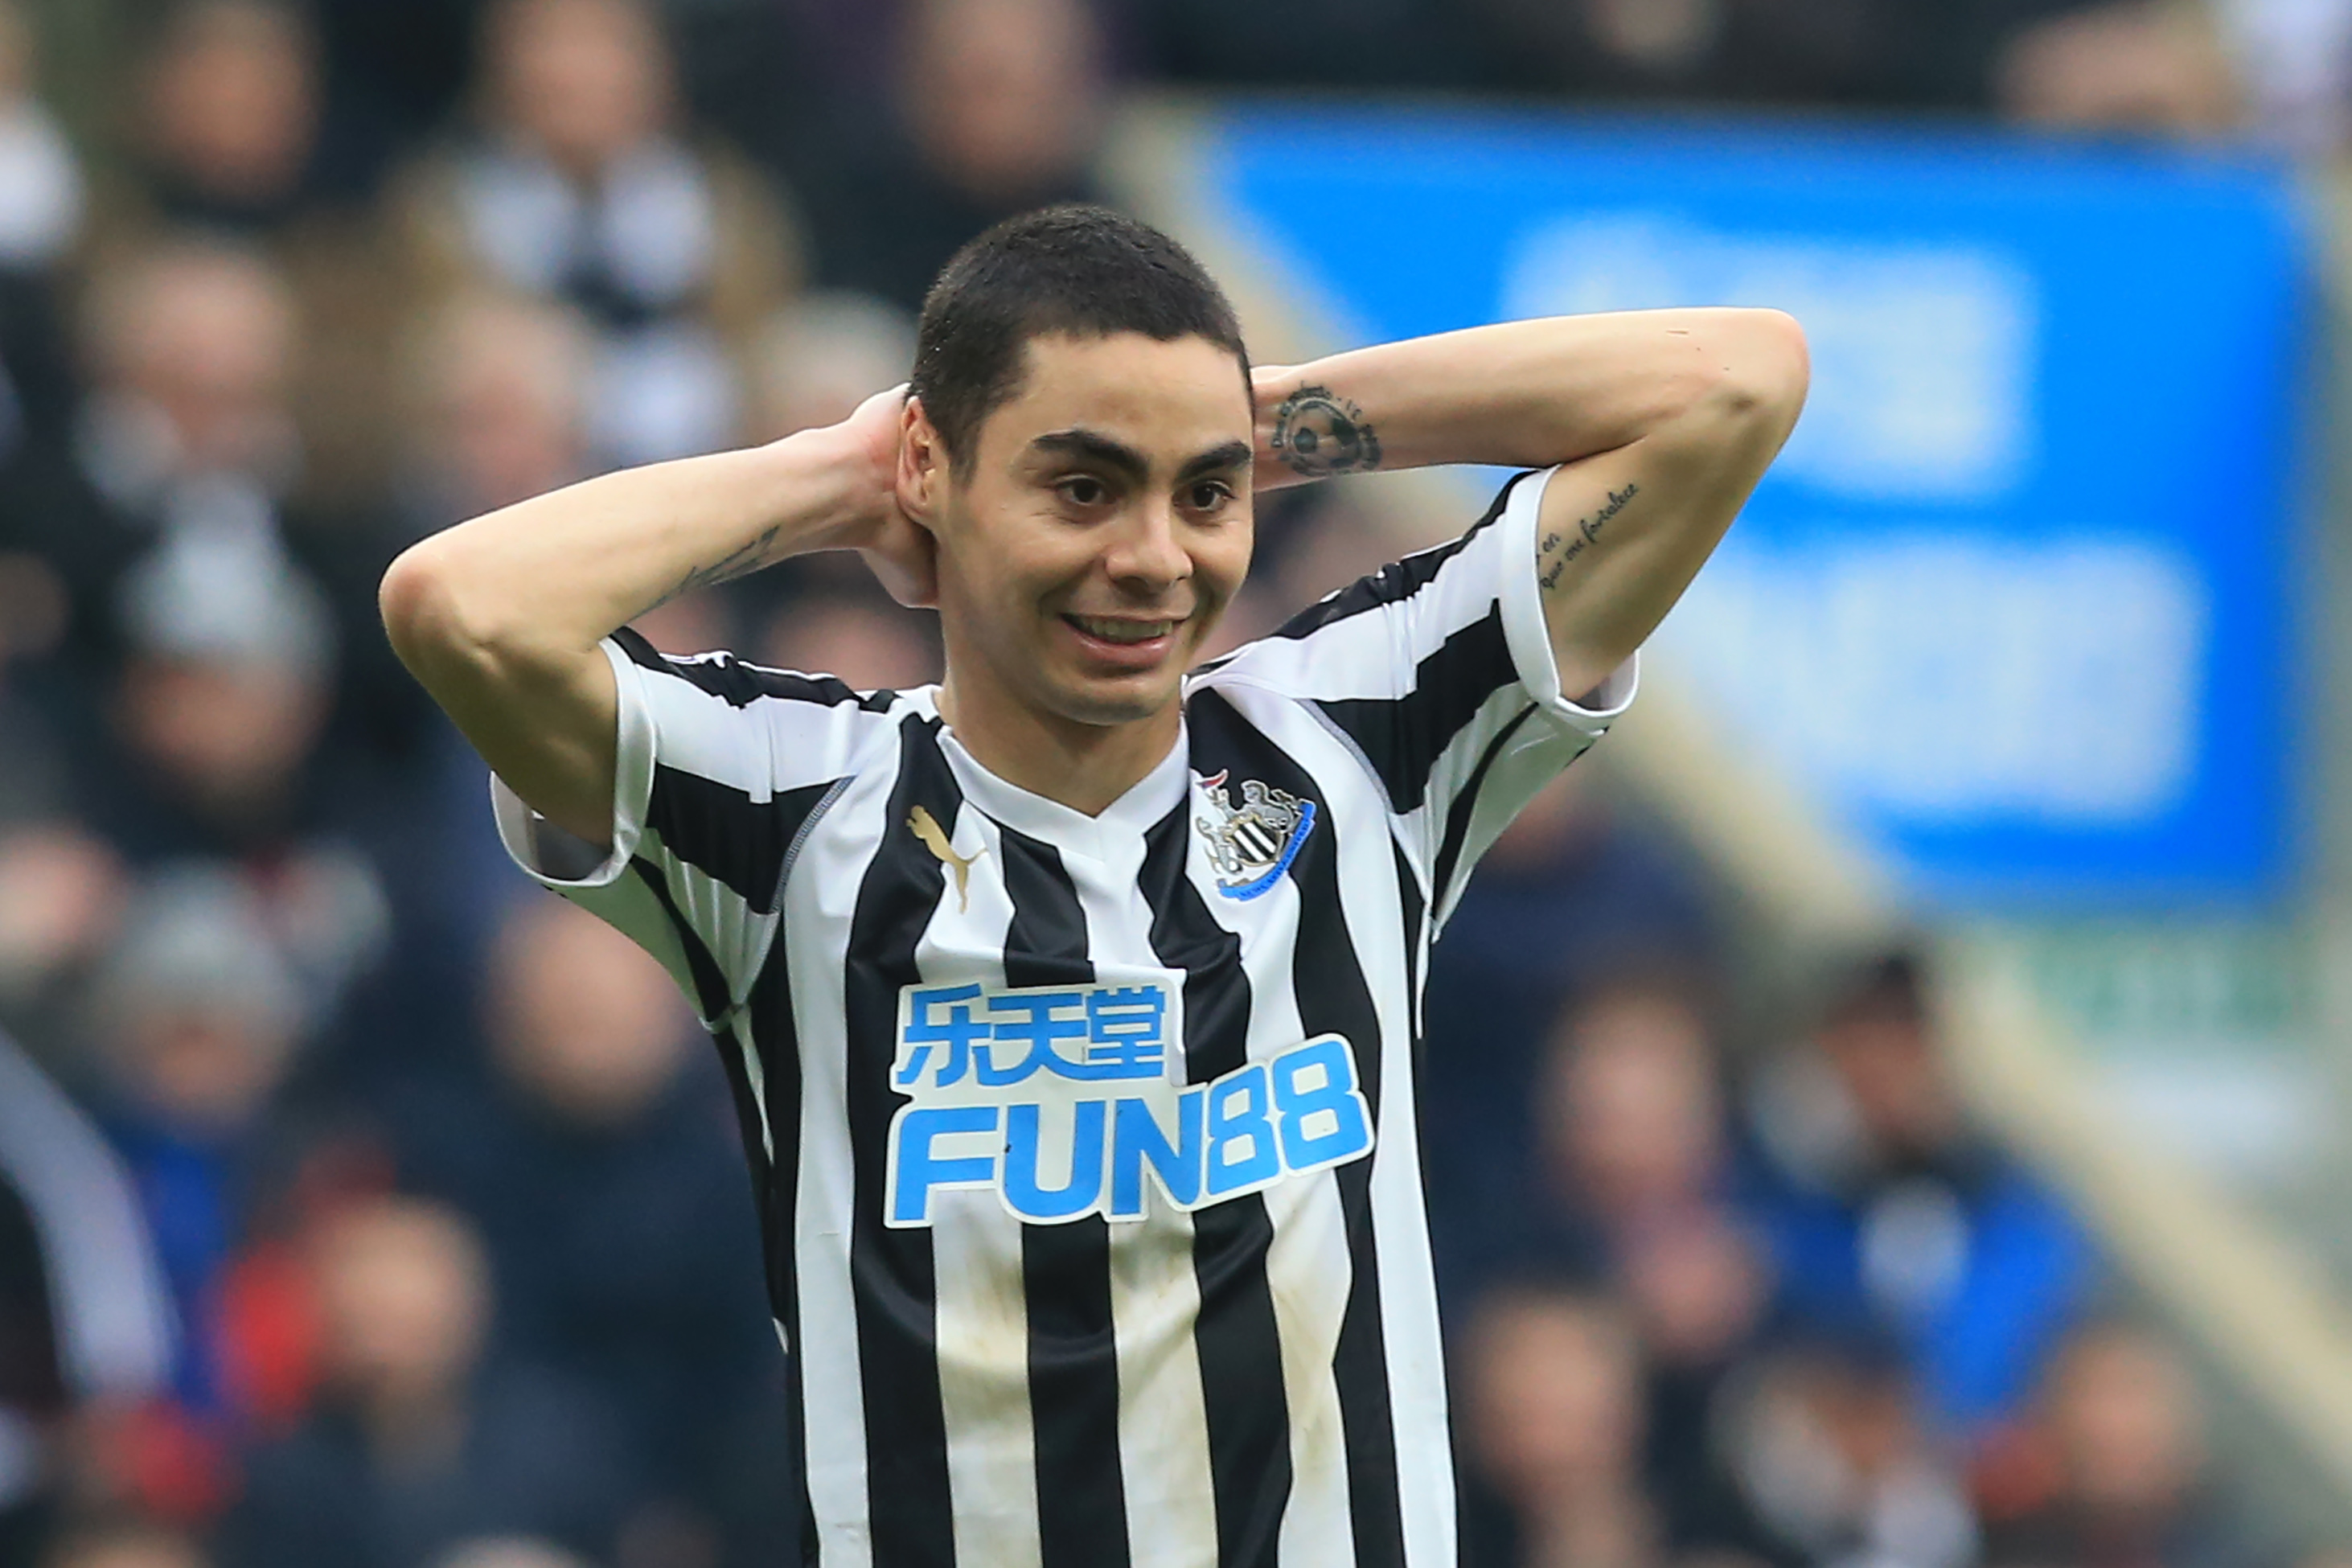 Almiron has been in red hot form in the FA Cup (Photo by Lindsey Parnaby/AFP/Getty Images)